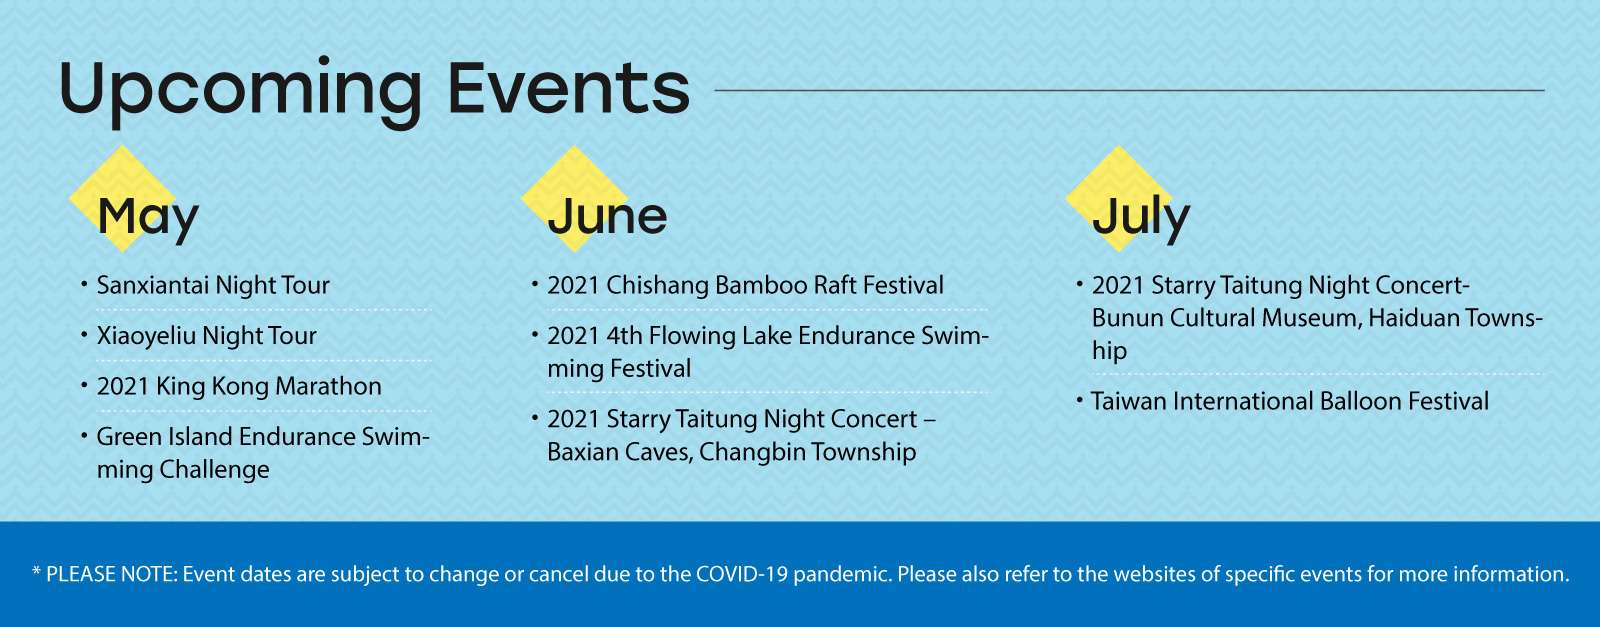 
Upcoming Events
May
・Sanxiantai Night Tour
・Xiaoyeliu Night Tour
・2021 King Kong Marathon
・Green Island Endurance Swimming Challenge
			
June
・2021 Chishang Bamboo Raft Festival
・2021 4th Flowing Lake Endurance Swimming Festival
・2021 Starry Taitung Night Concert- Baxian Caves, Changbin Township

July
・2021 Starry Taitung Night Concert- Bunun Cultural Museum, Haiduan Township 
・Taiwan International Balloon Festival

* PLEASE NOTE: Event dates are subject to change or cancel due to the COVID-19 pandemic. Please also refer to the websites of specific events for more information
